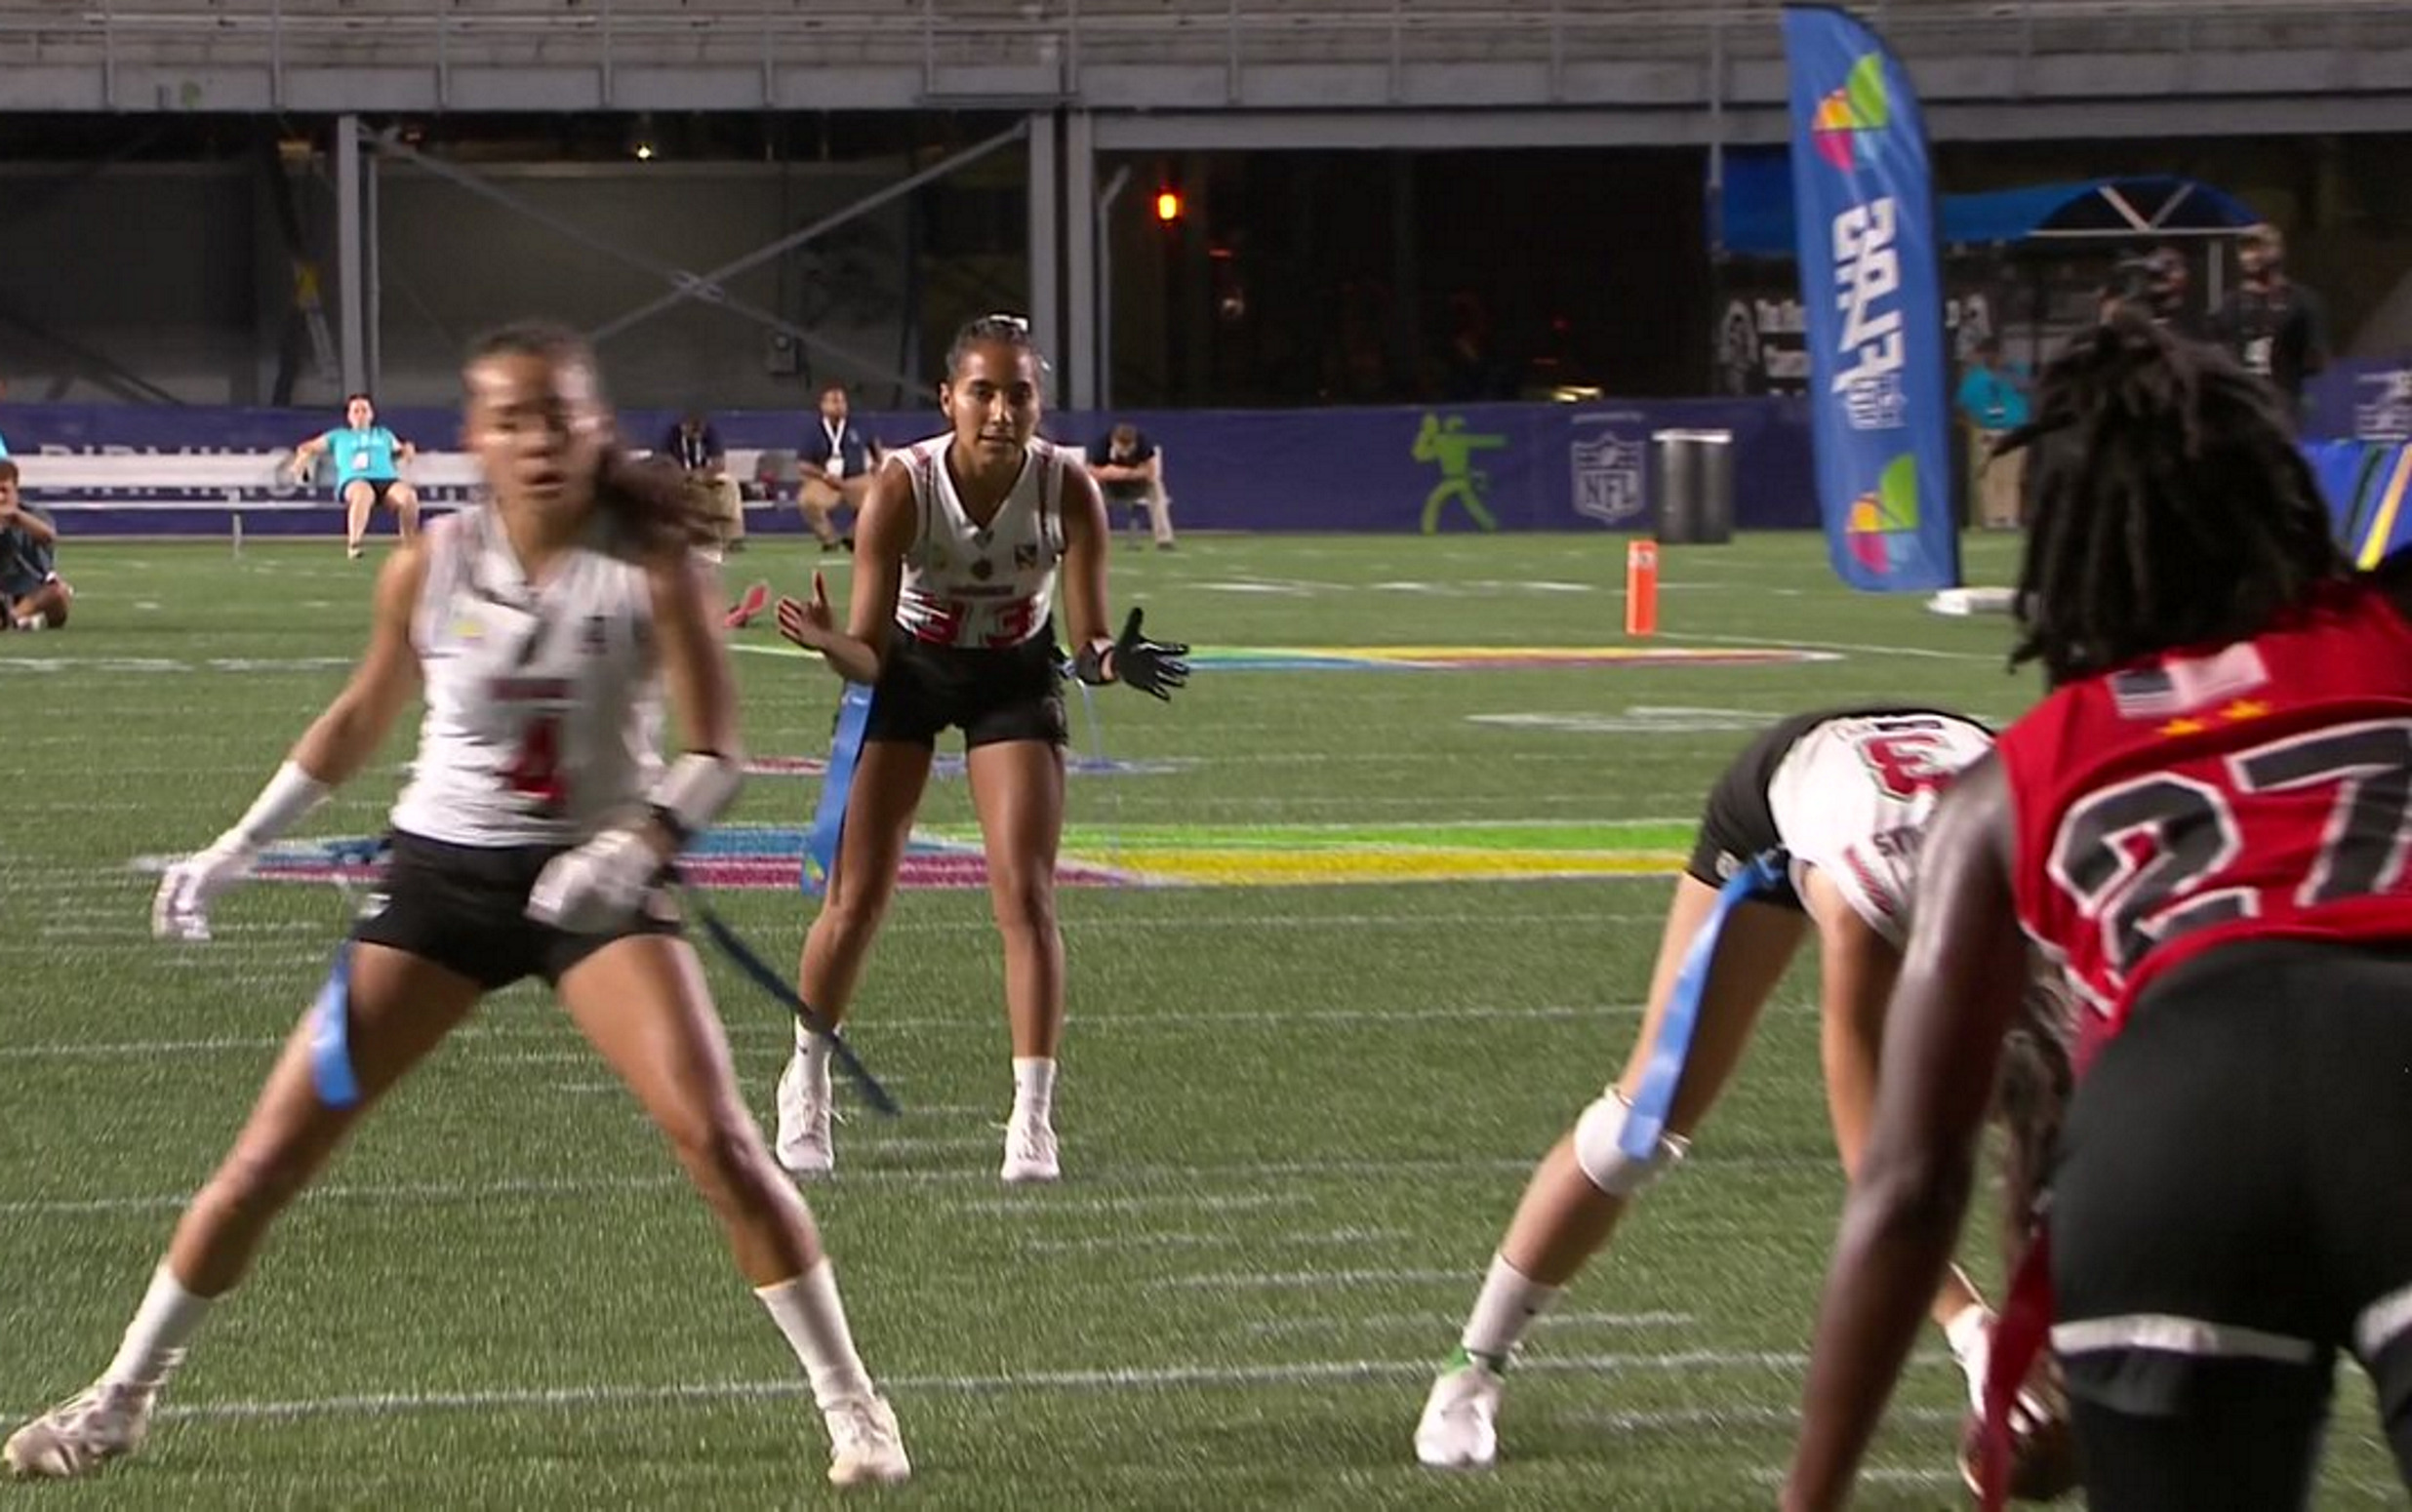 Mexico stuns the United States to win a World Games gold medal in women's flag football